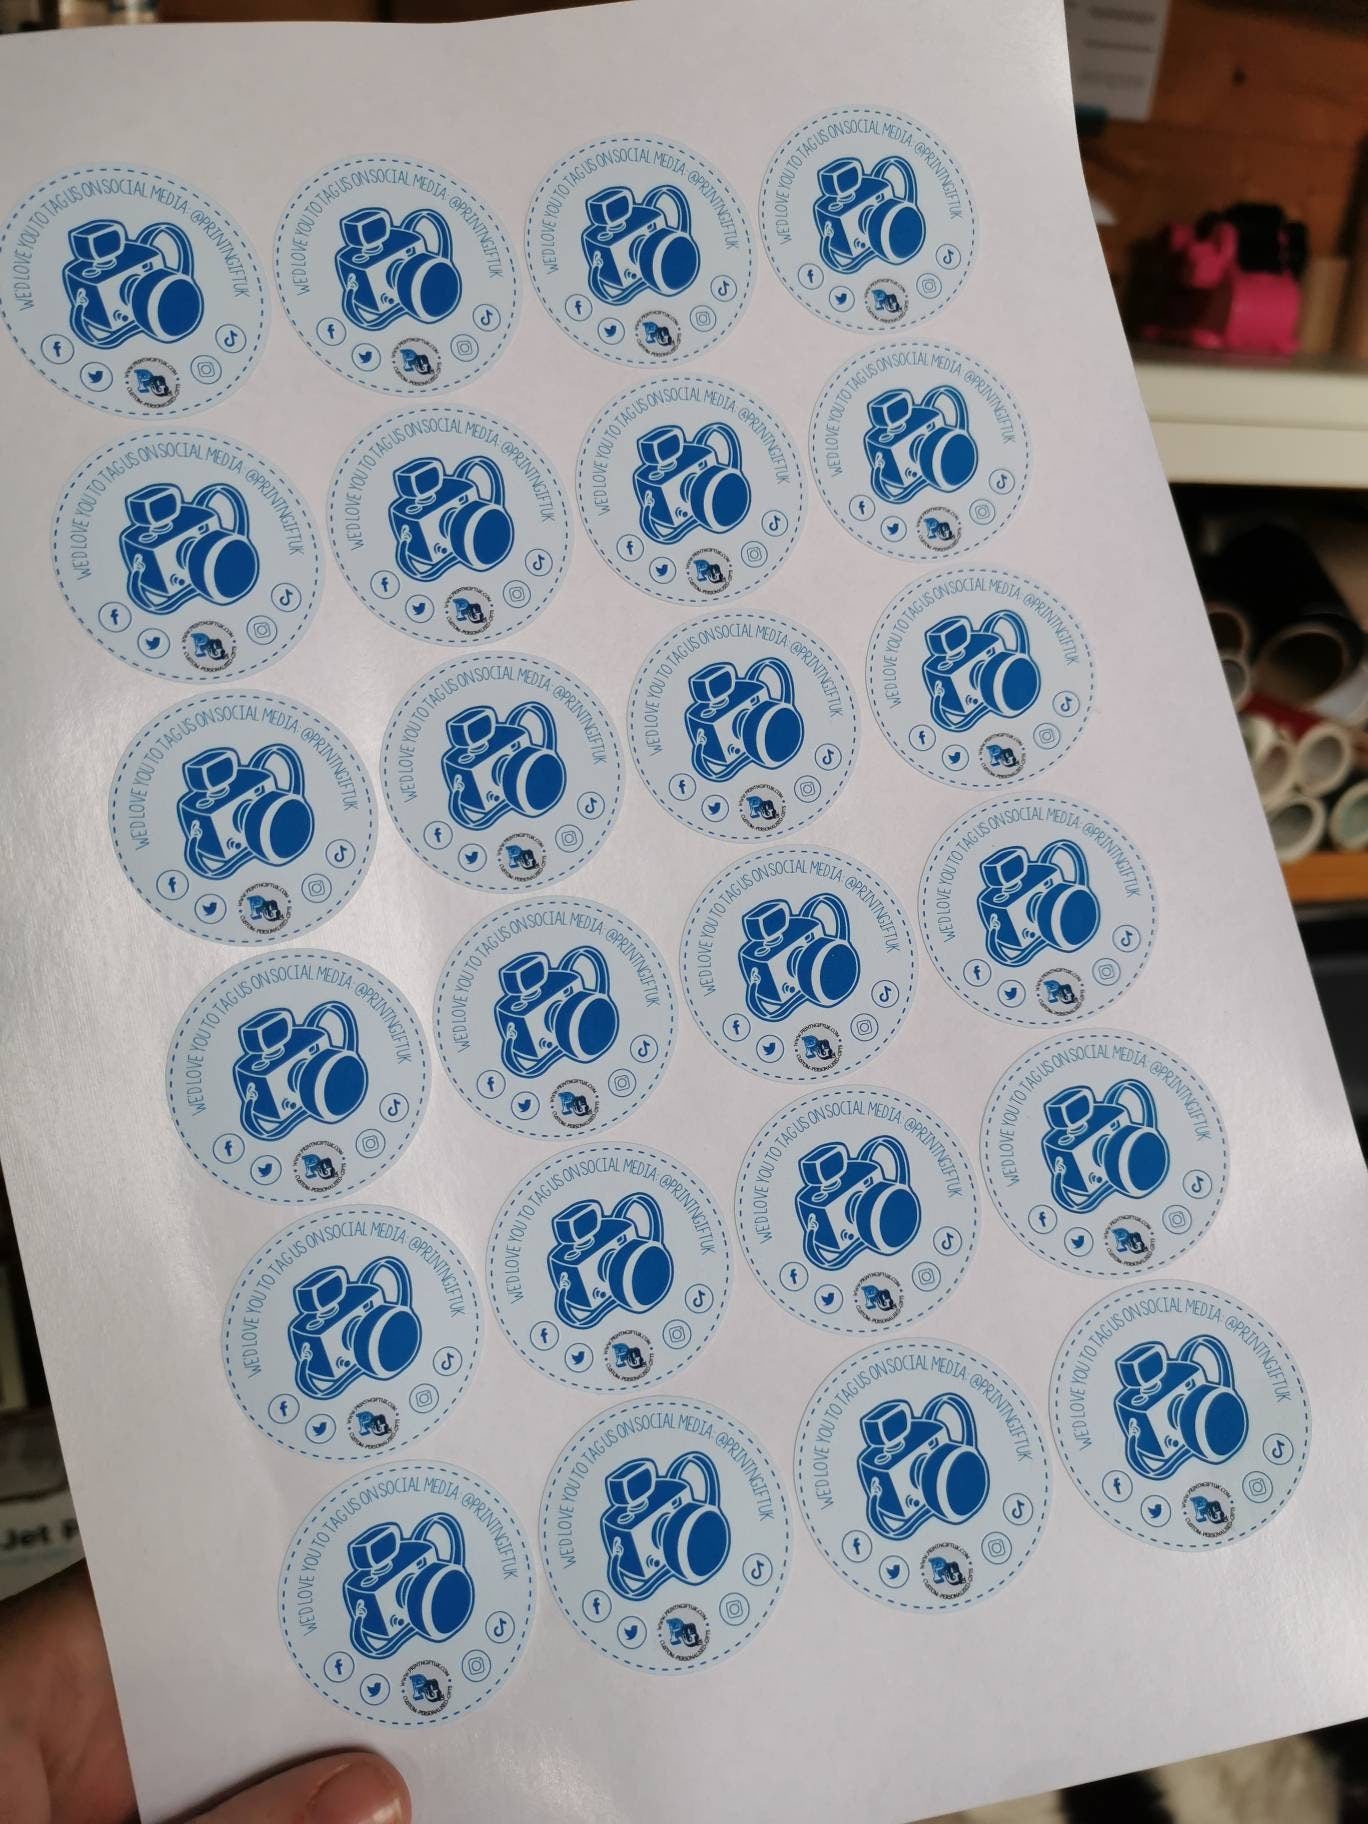 A4 Sheet "Tag Us" Stickers for business